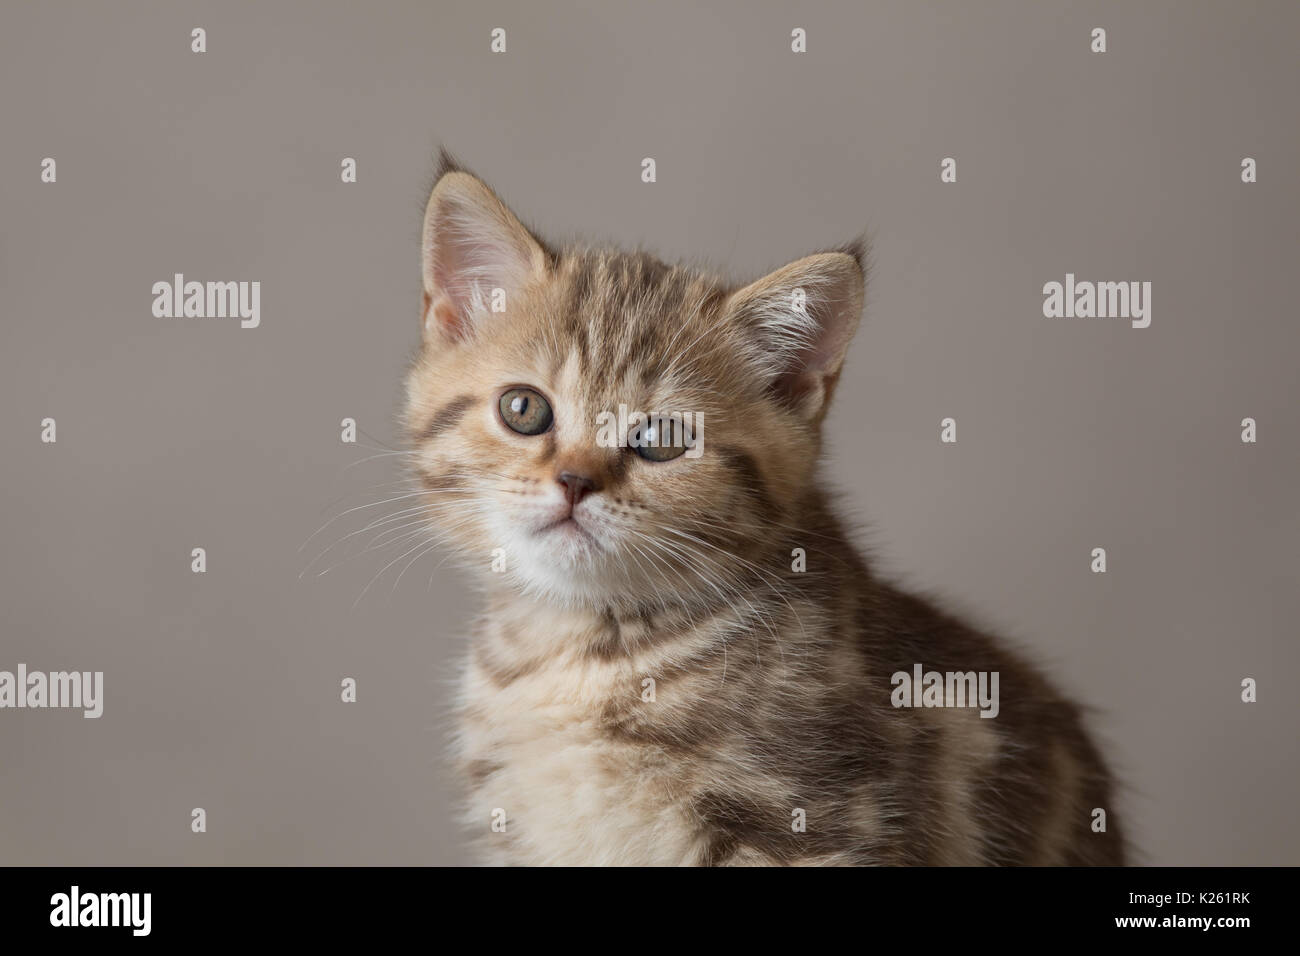 Young cat portrait on brown background Stock Photo